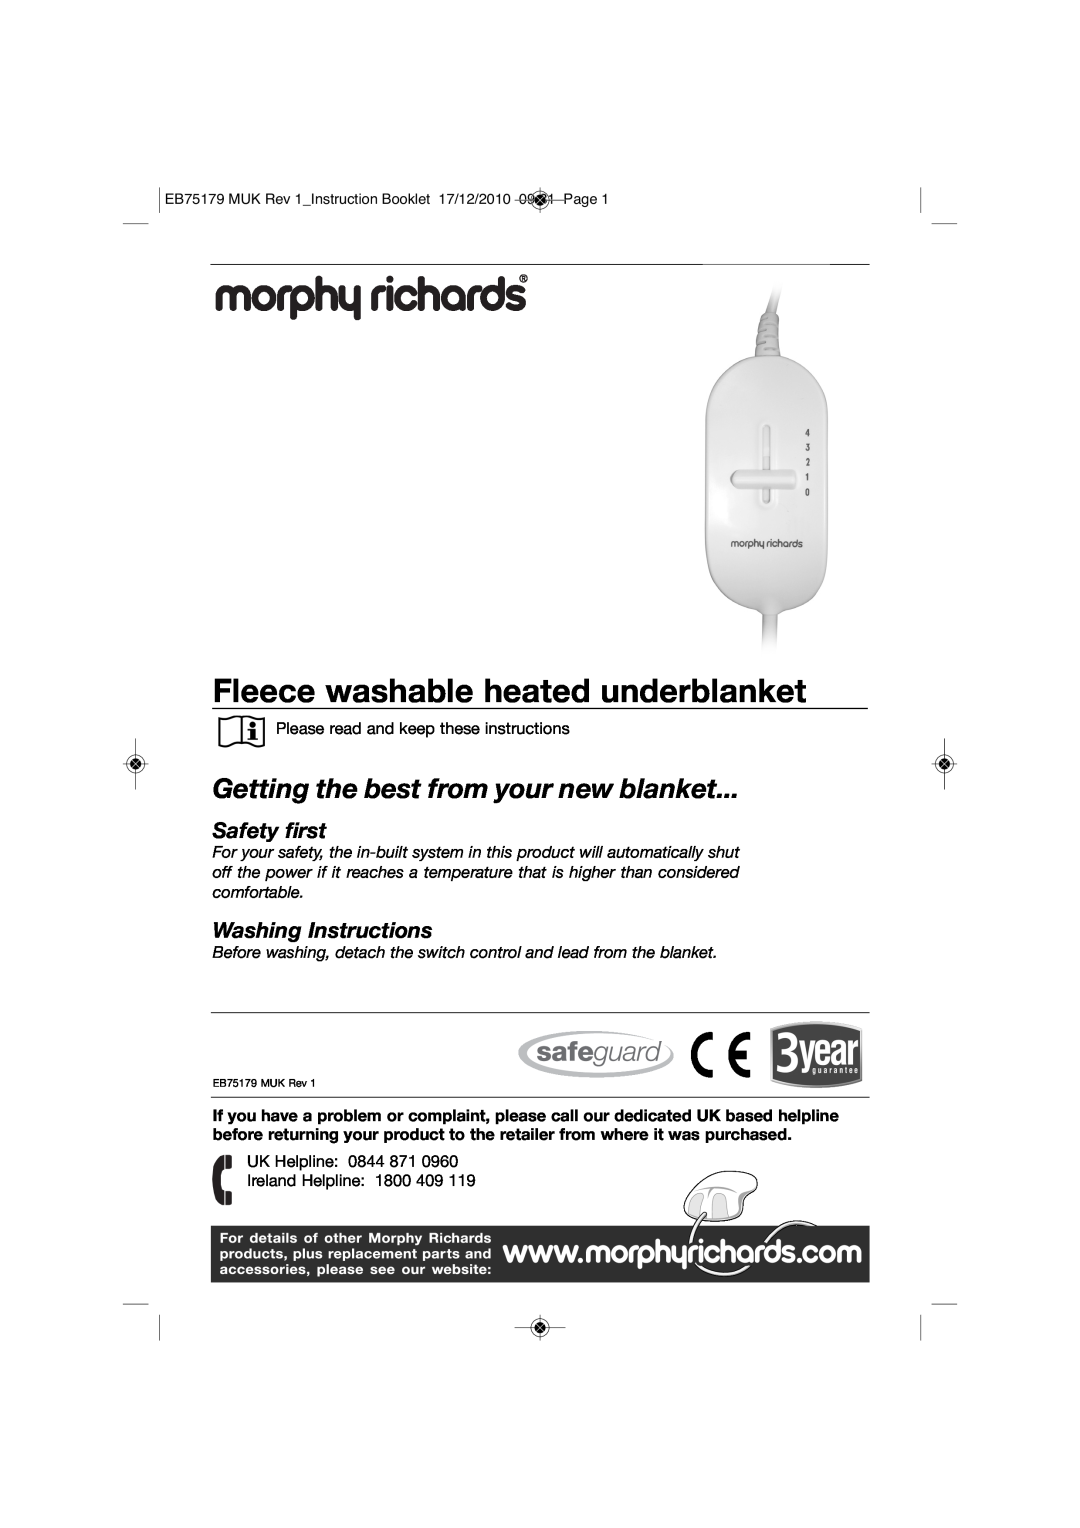 Morphy Richards EB75179 manual Fleece washable heated underblanket, Getting the best from your new blanket, Safety first 